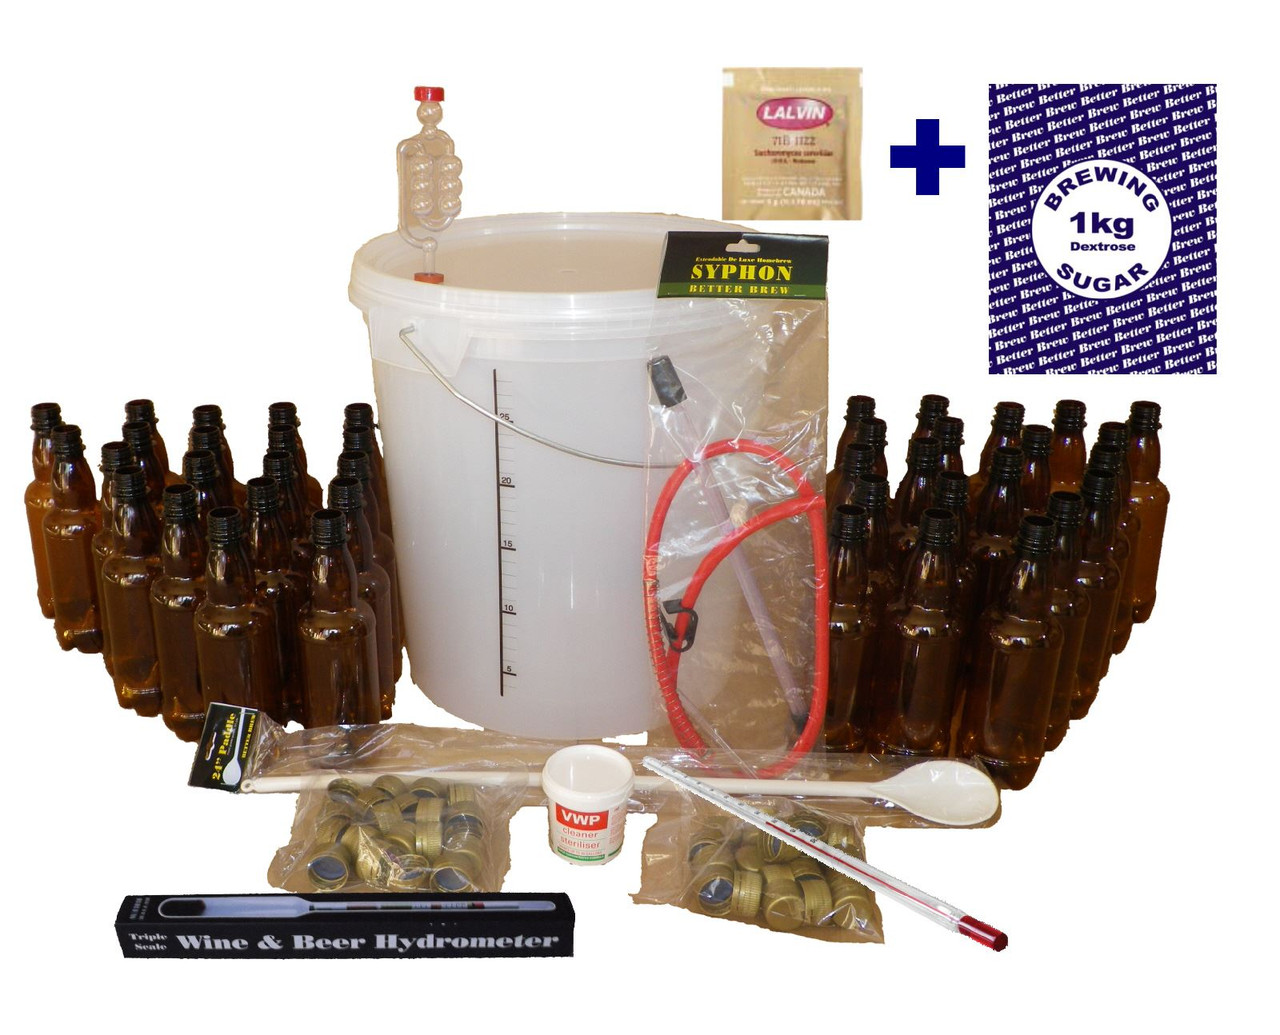 Turbo Cider Homebrew Kit 33L/7 Gal Full Starter with Brewer Sugar & Yeast NEW